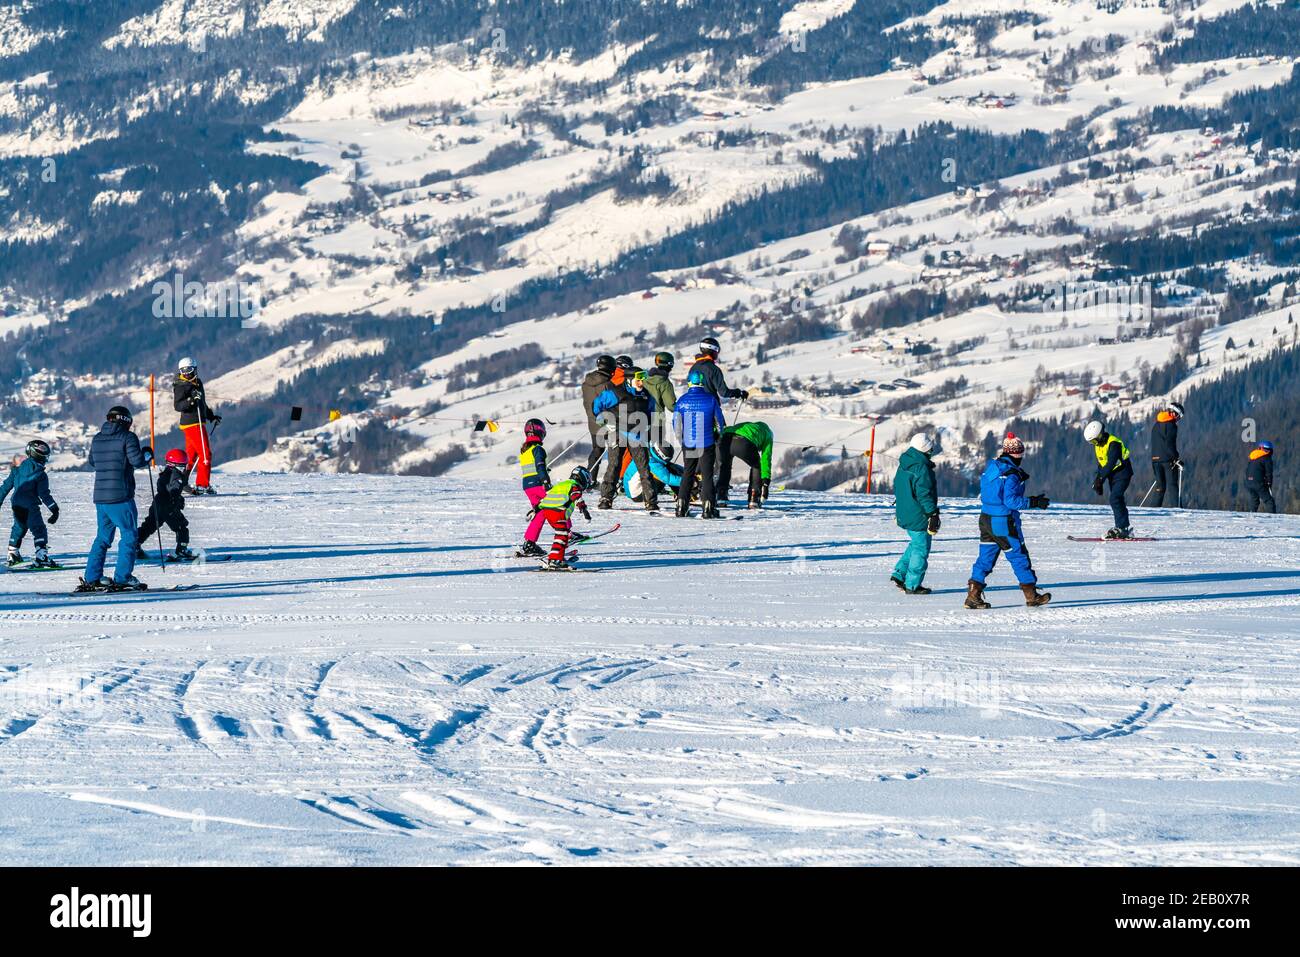 Large group of skiers together on a winter holiday in an alpine skiing resort. Stock Photo